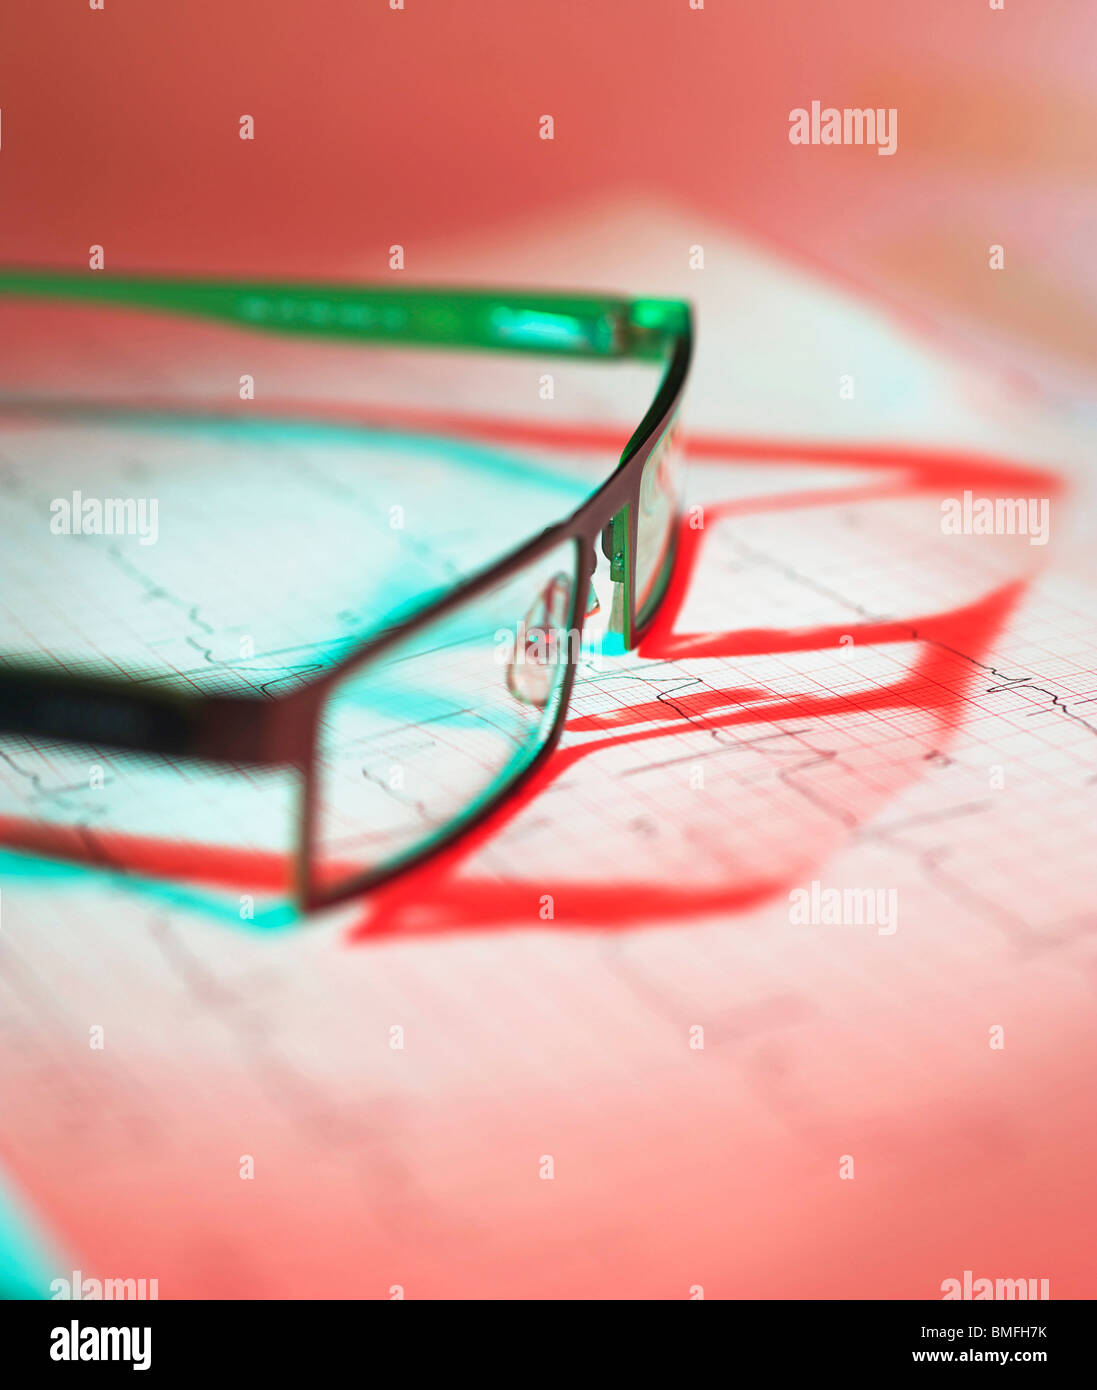 Glasses lying on ECG results casting a shadow with subtle blue and red lighting Stock Photo